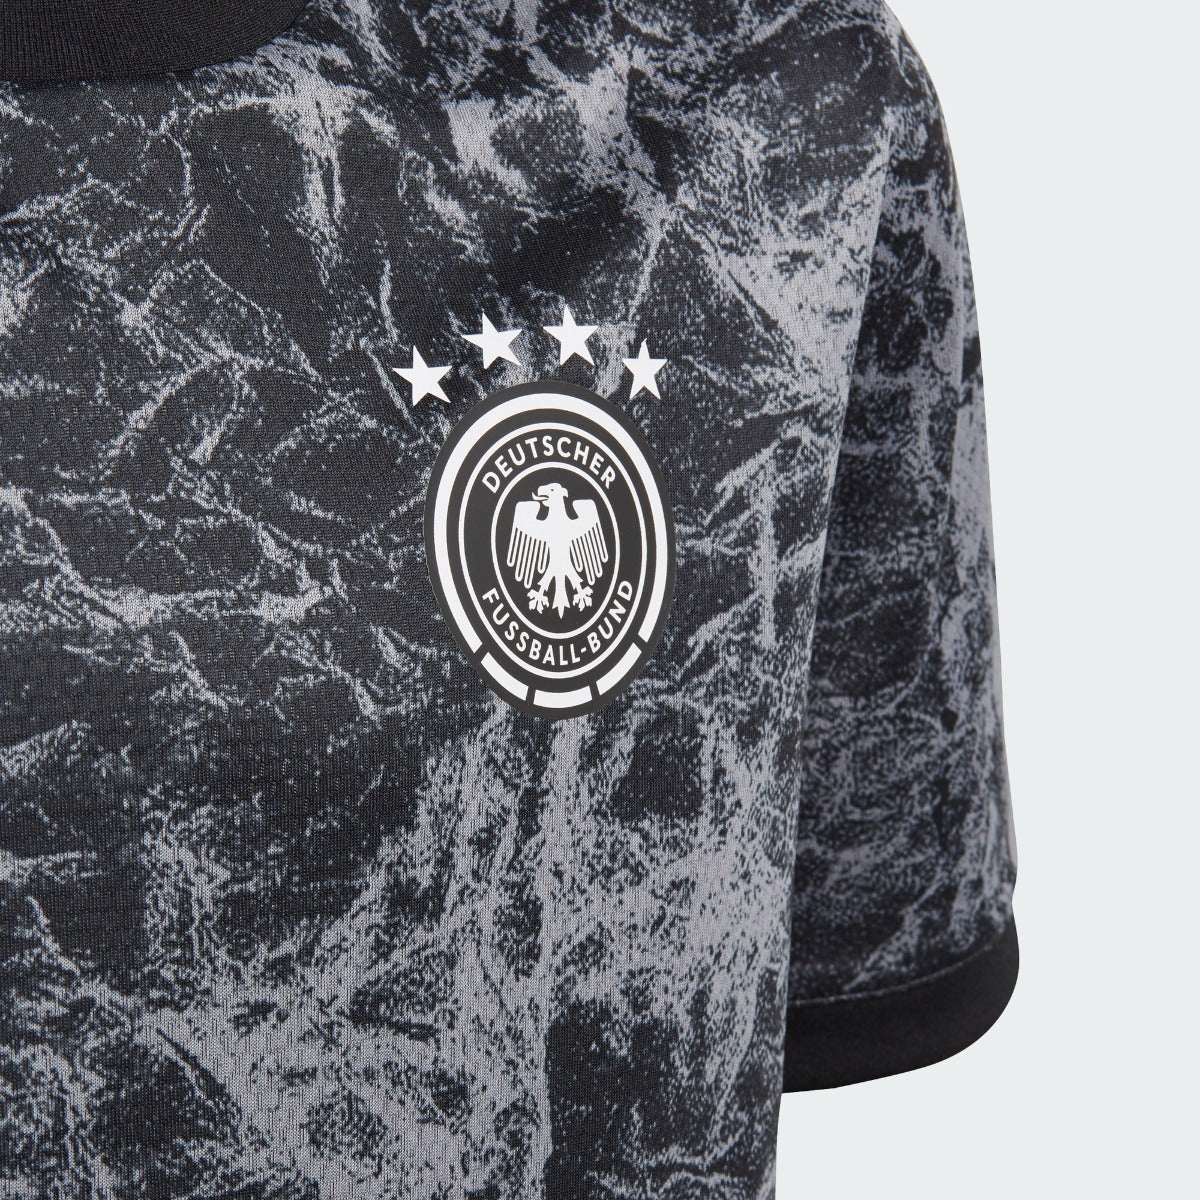 Adidas 2021-22 Germany Youth Training Jersey - Black (Detail 1)